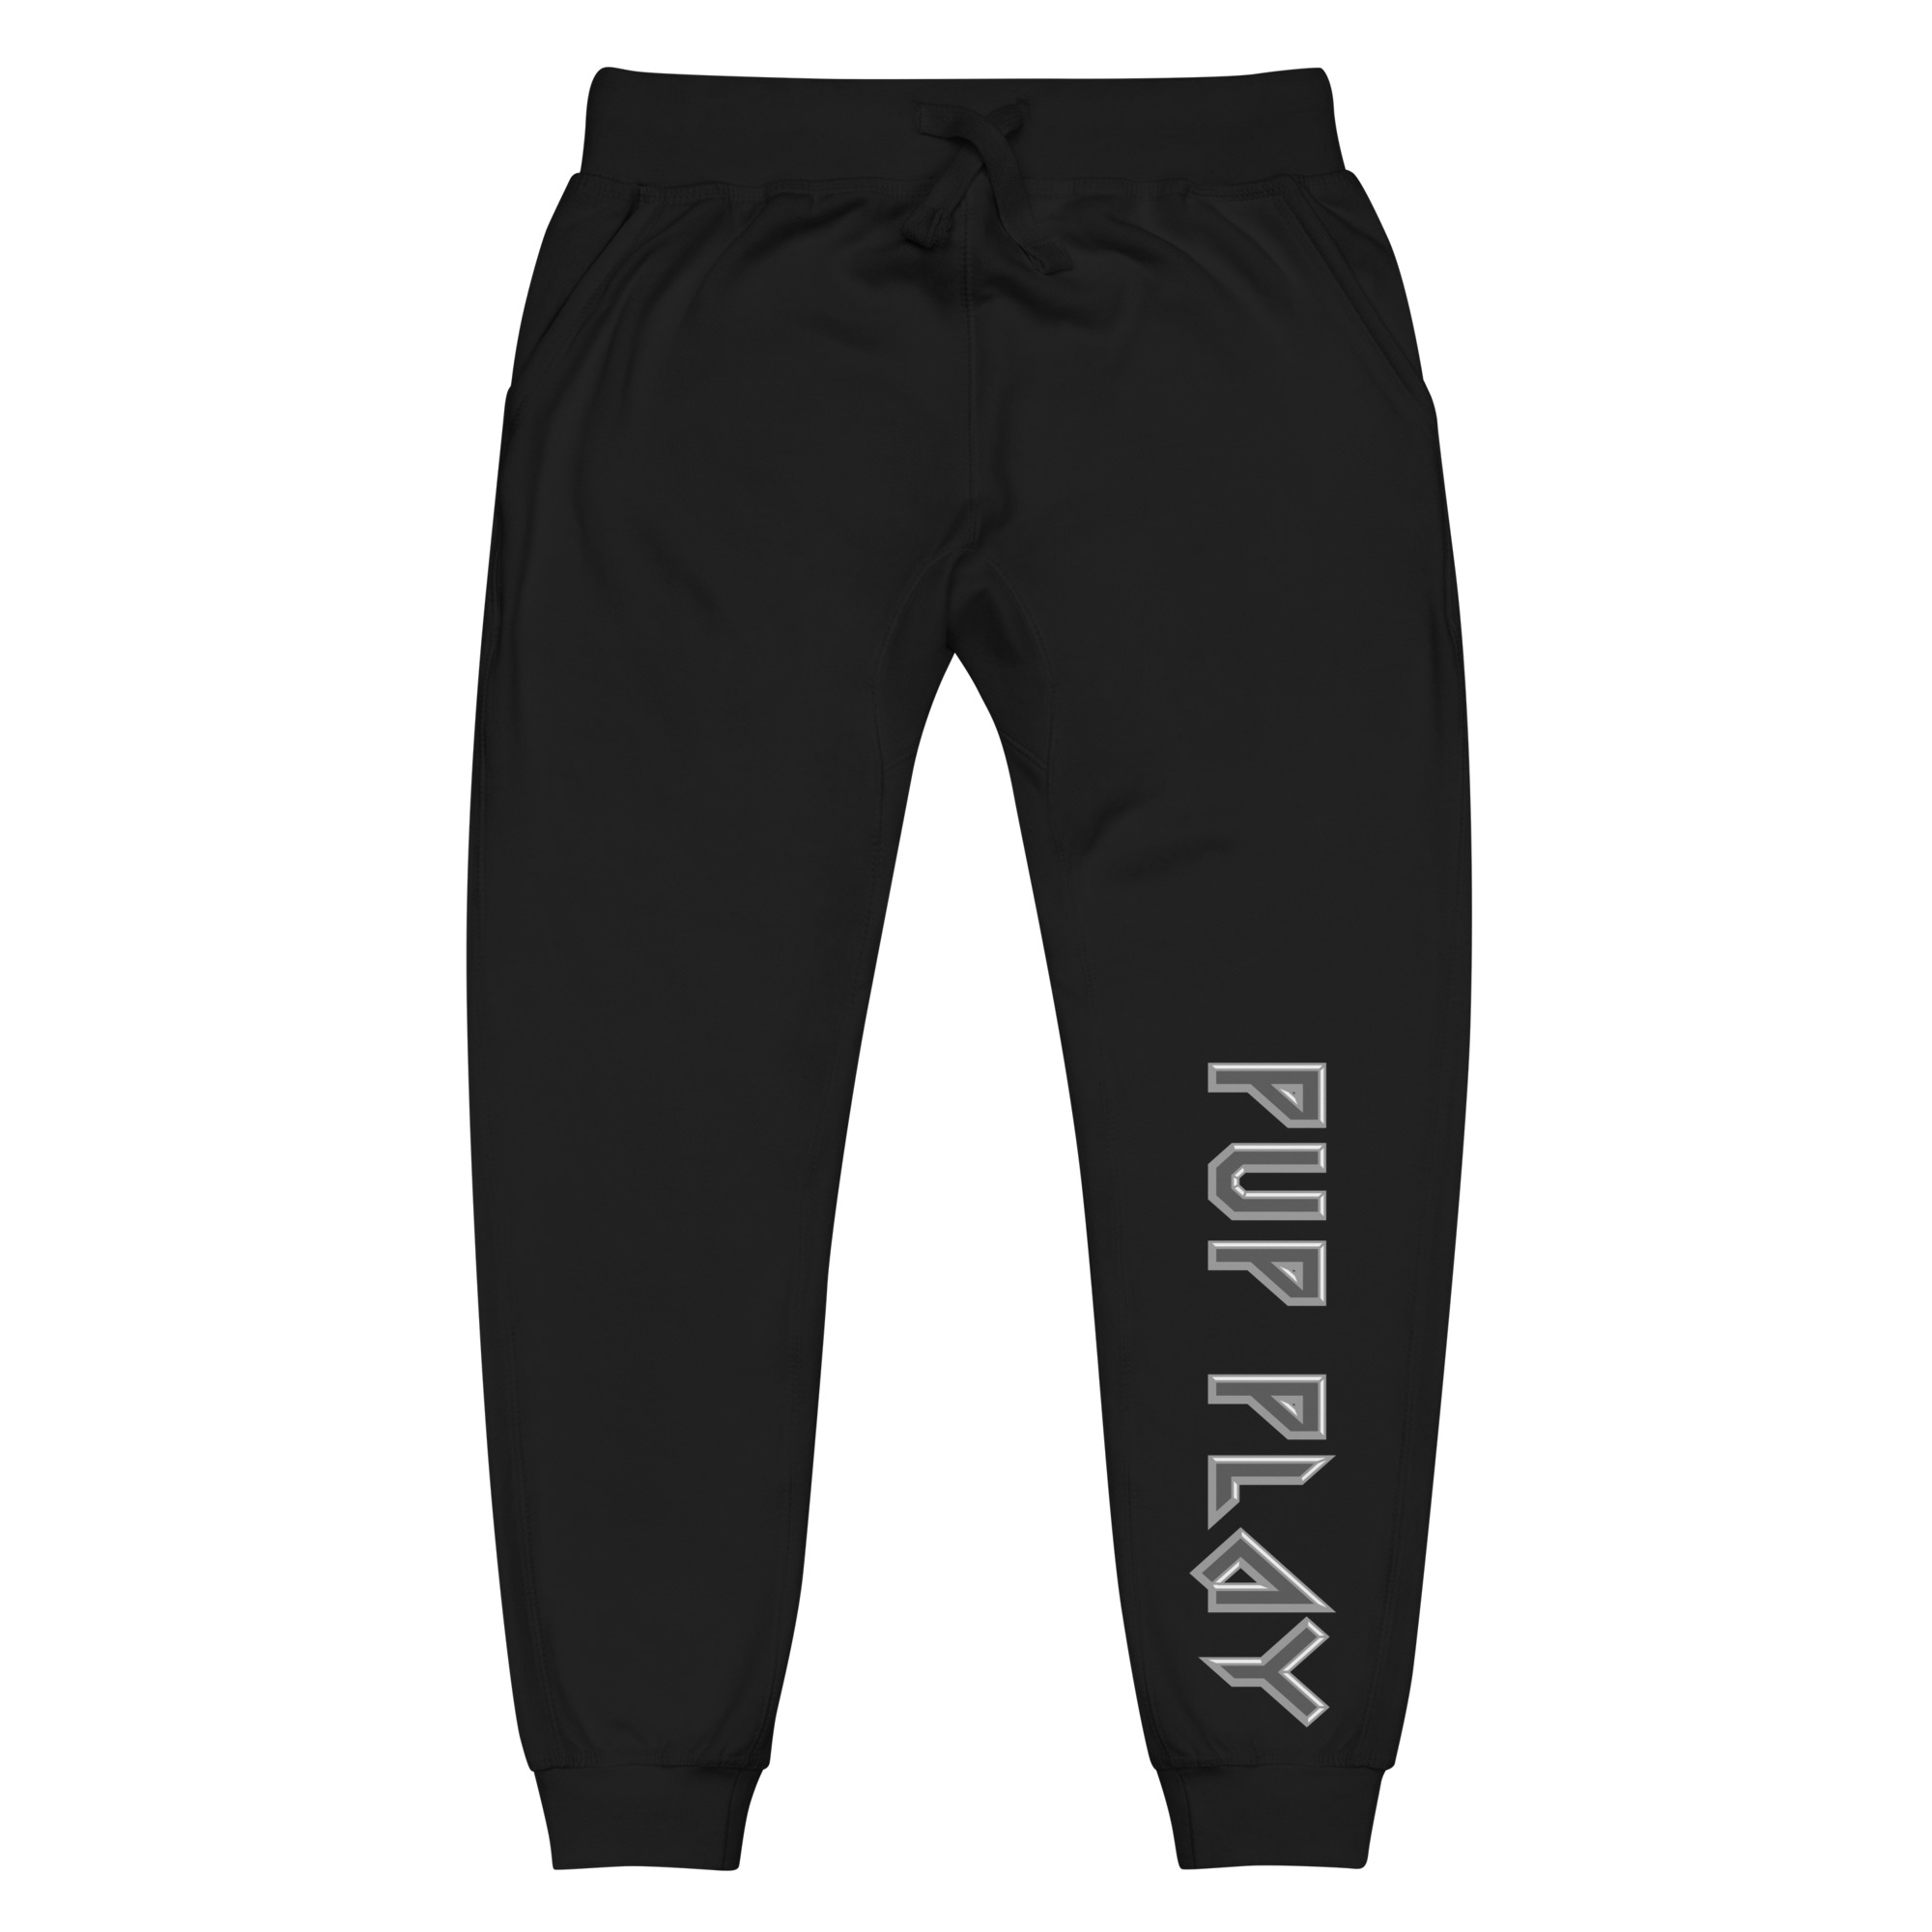 Featured image for “Pup Play - Cotton Heritage Unisex fleece sweatpants”